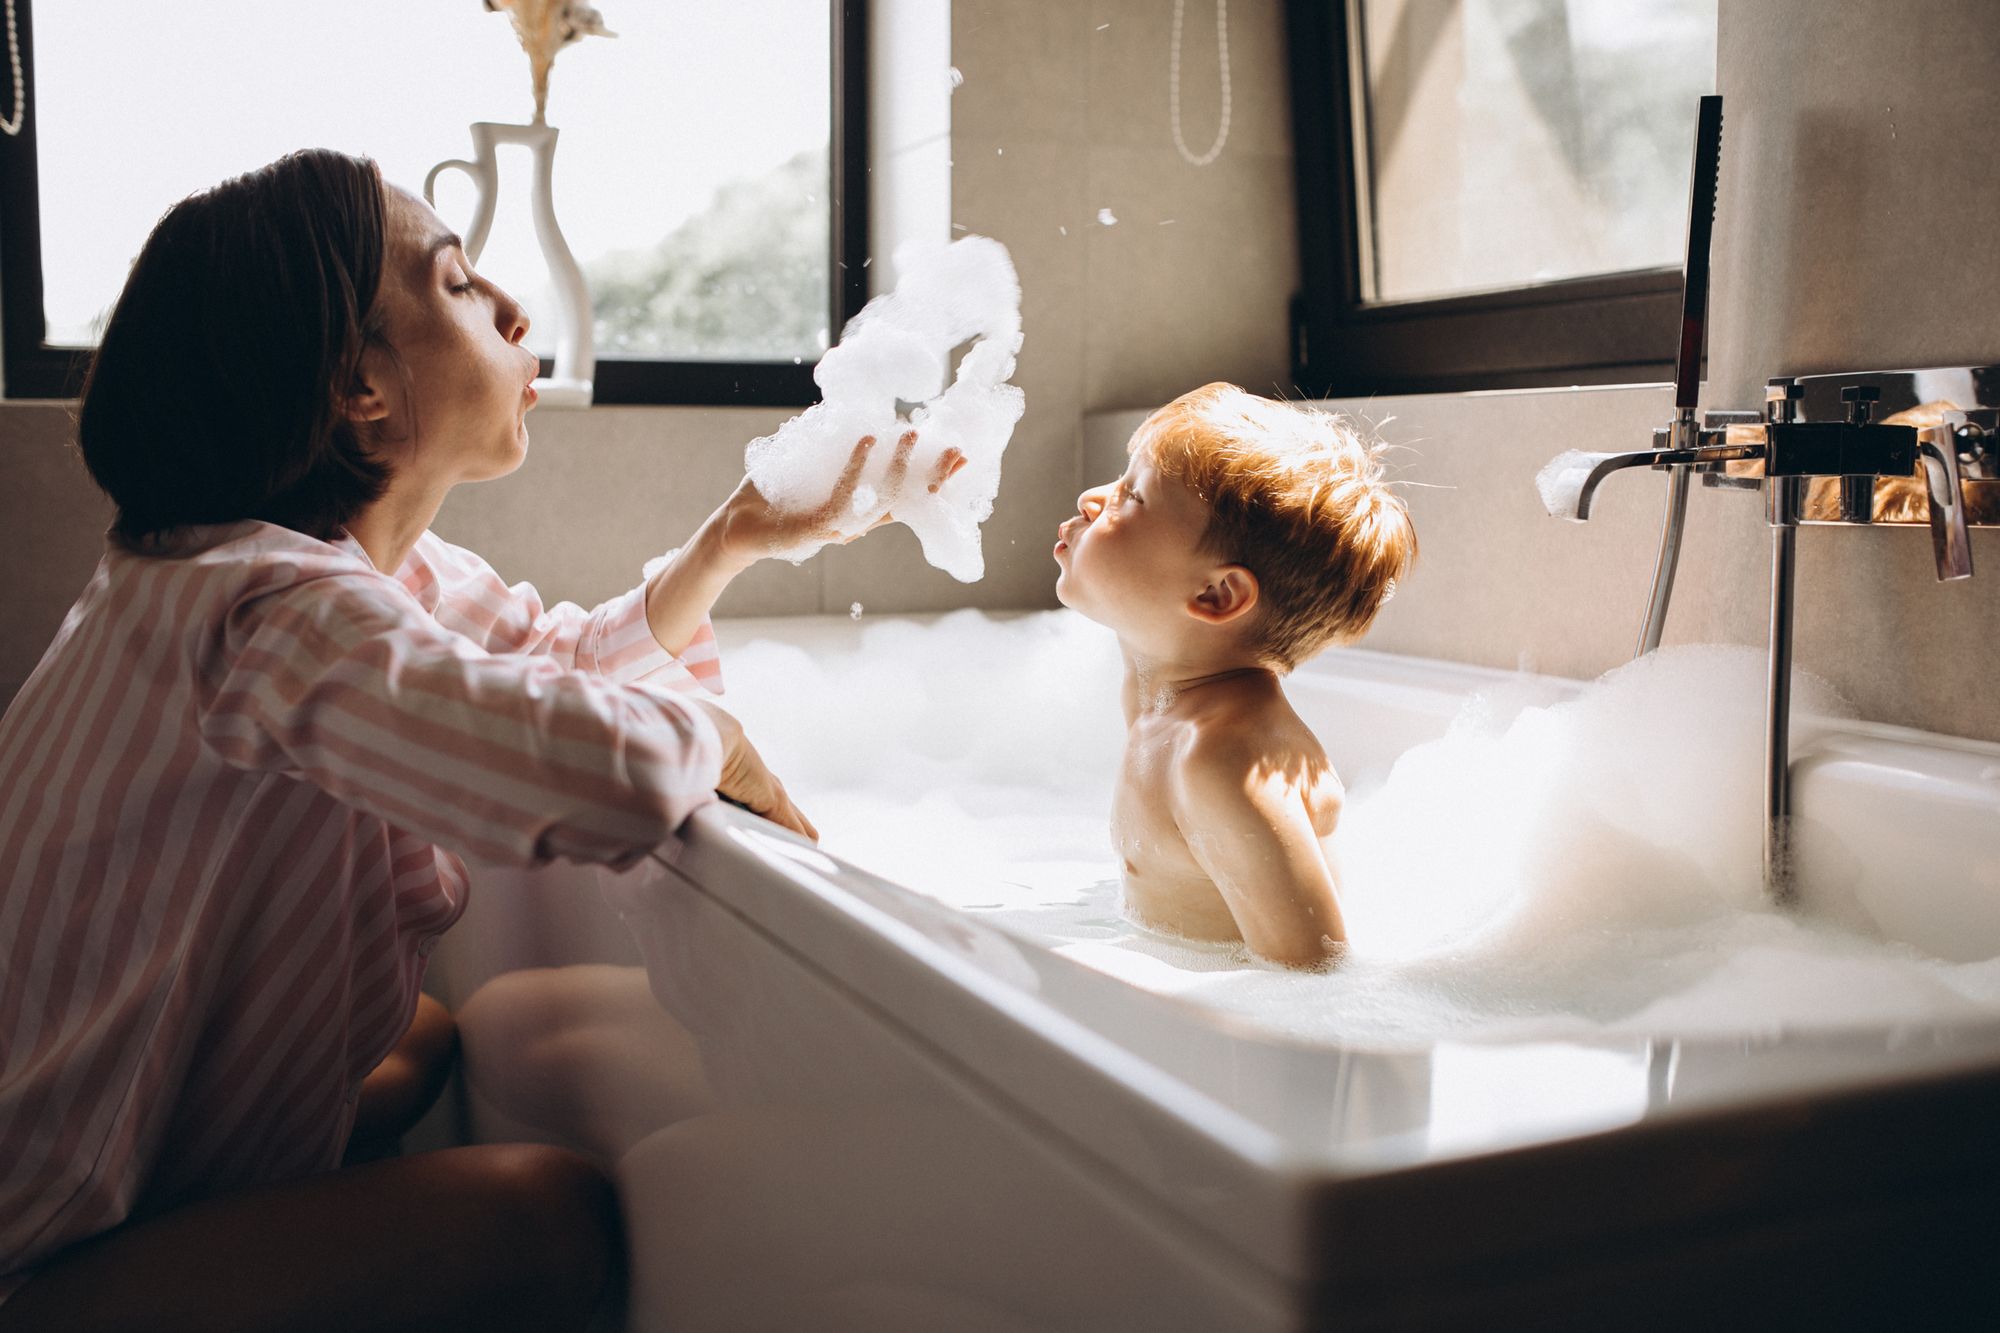 Kid bathing with parent by PH888 | www.shutterstock.com